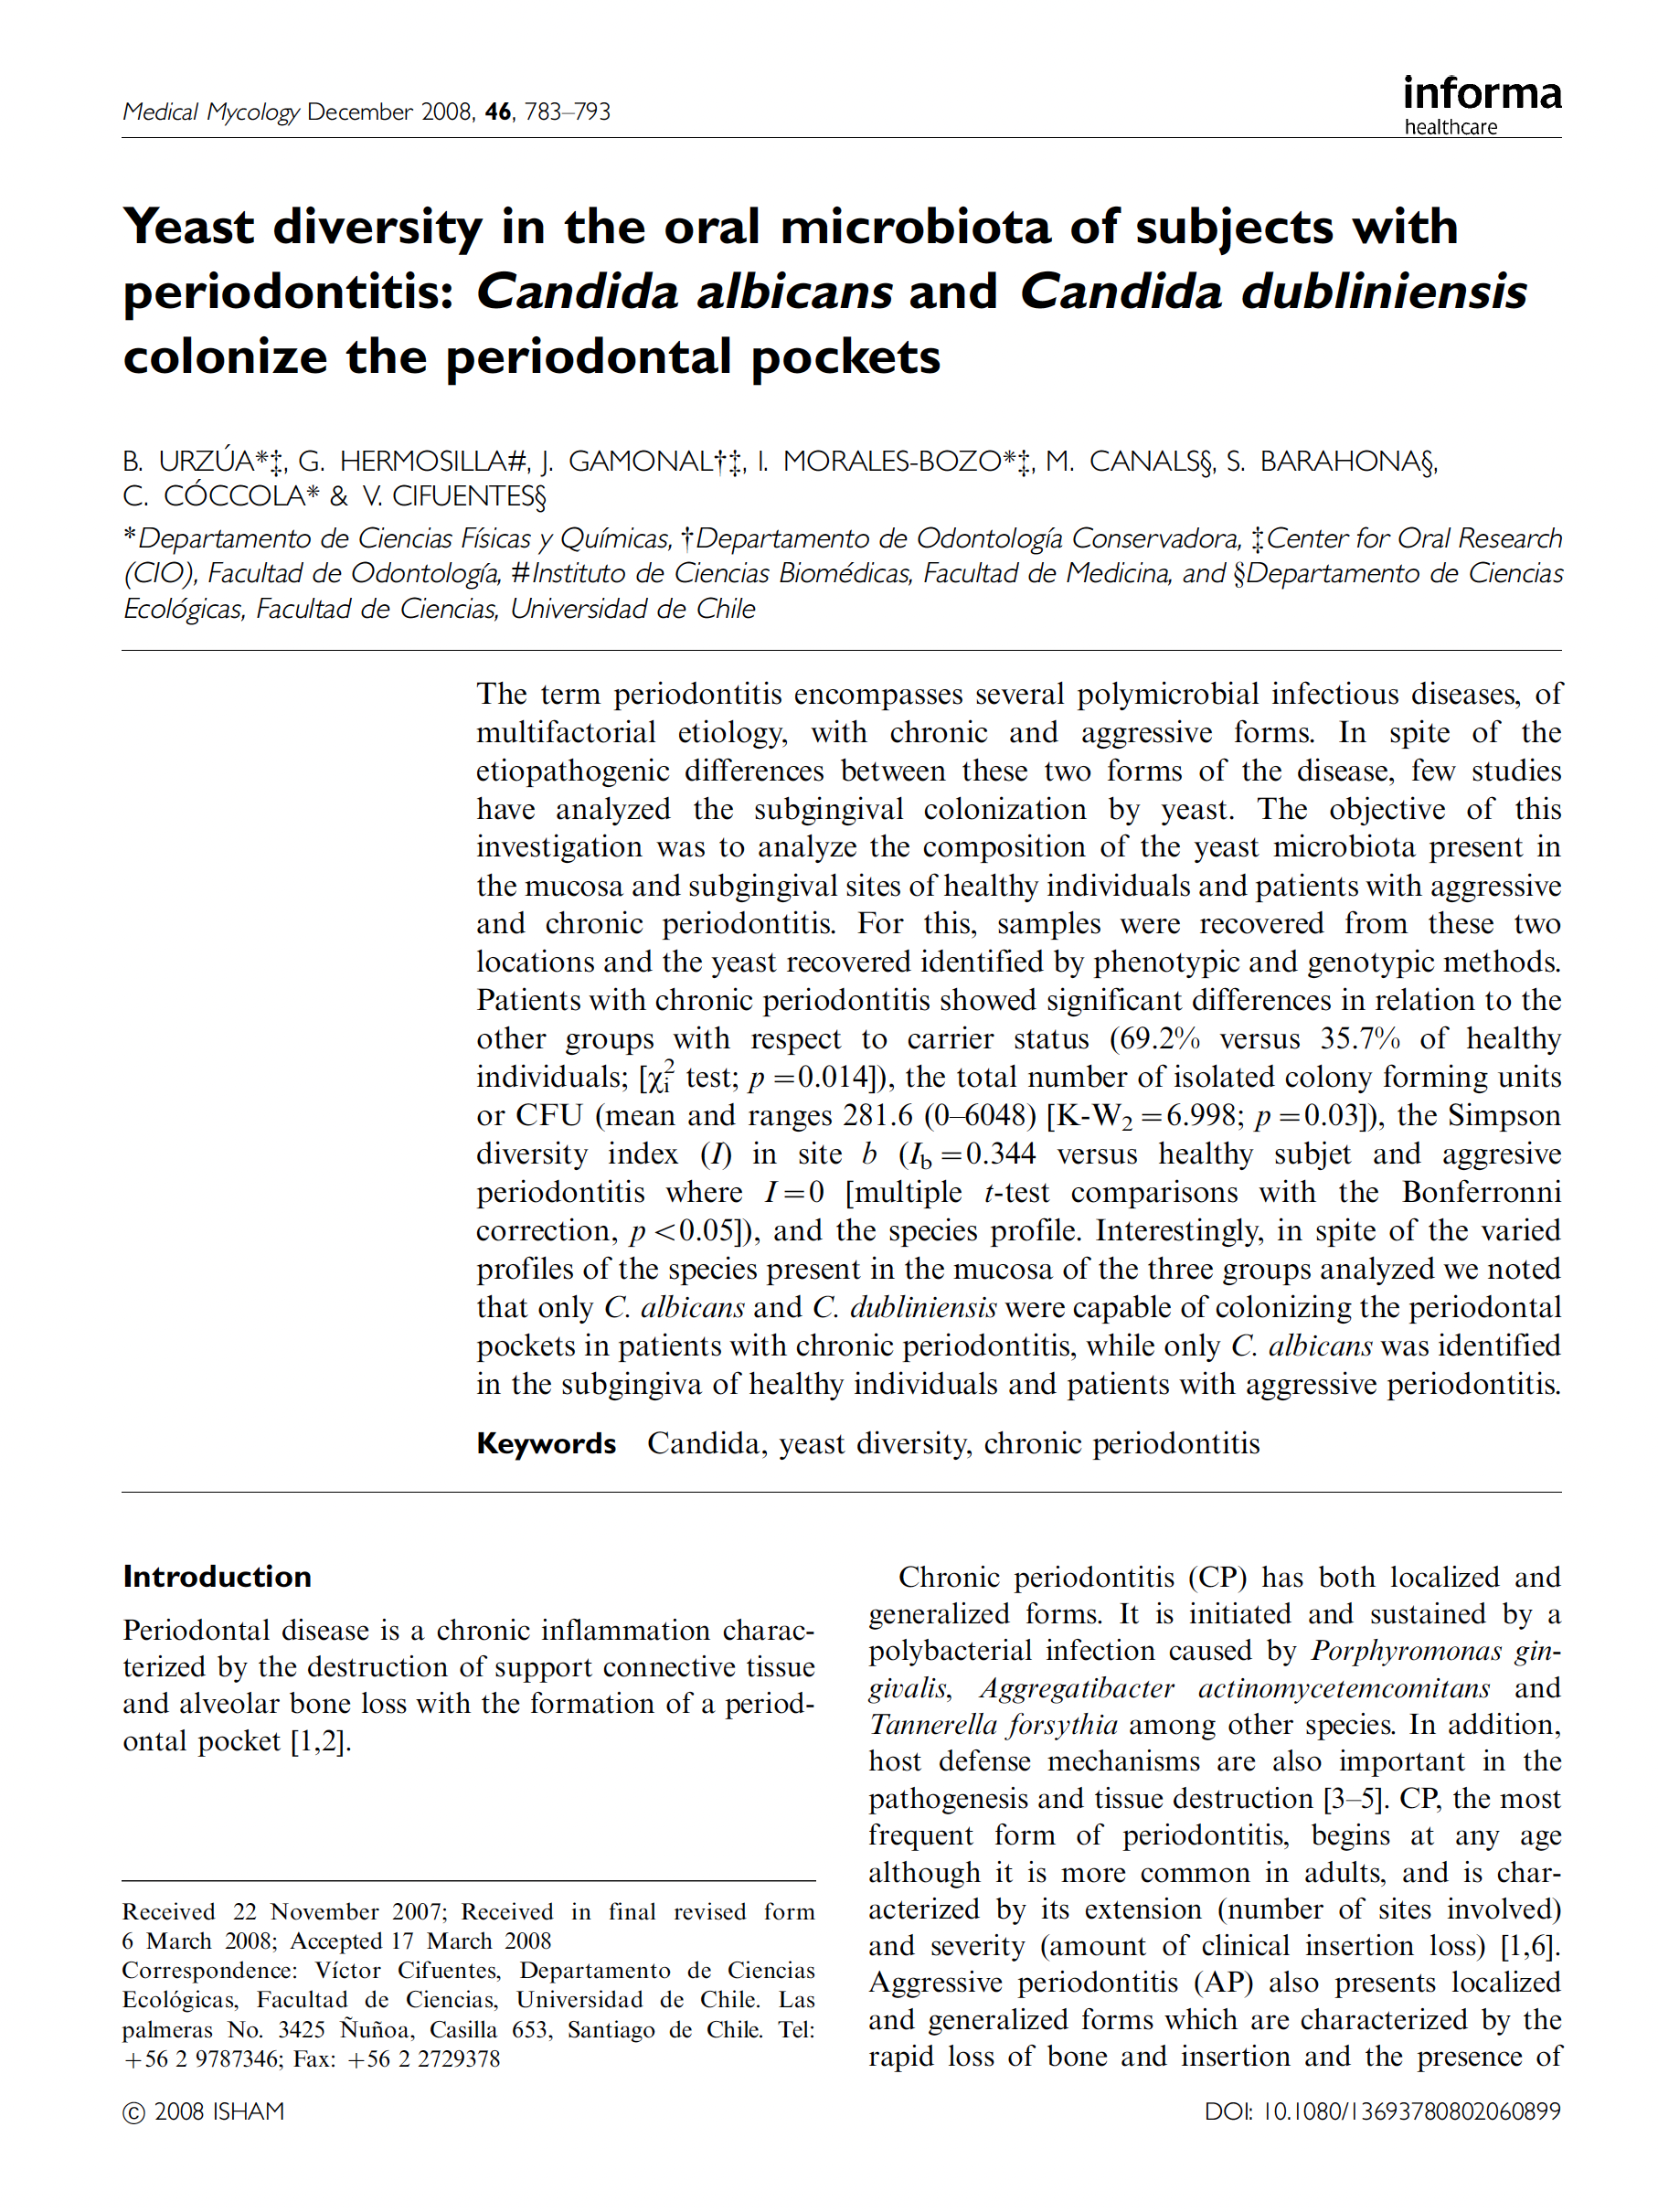 Yeast diversity in the oral microbiota of subjects with periodontitis- Candida albicans and Candida dubliniensis colonize the periodontal pockets